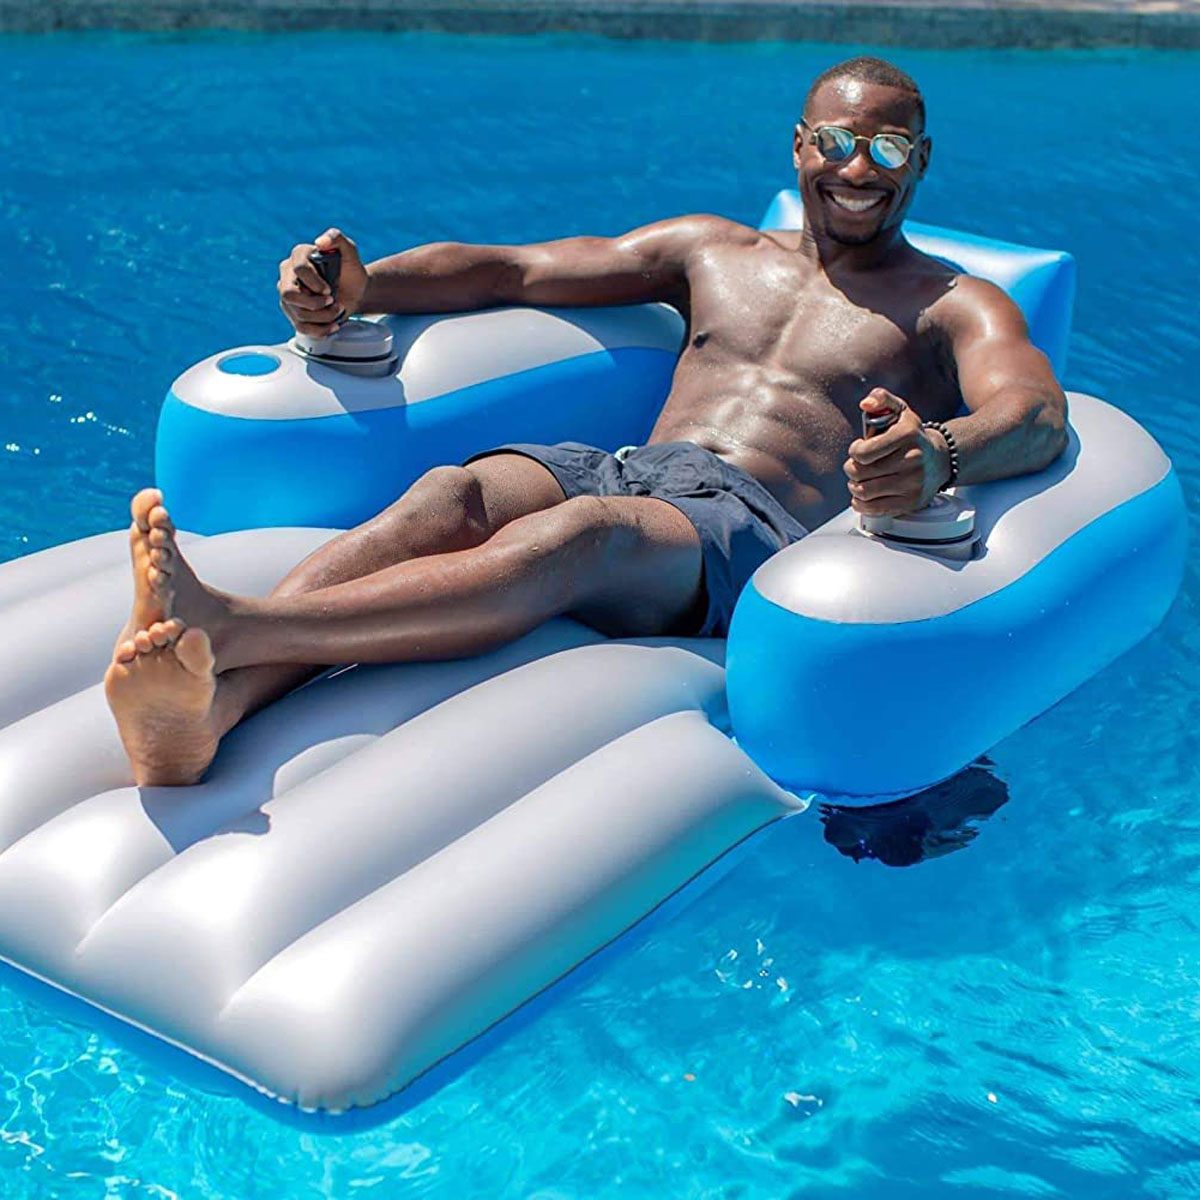 This Motorized Pool Float Moves and Steers with a Propeller